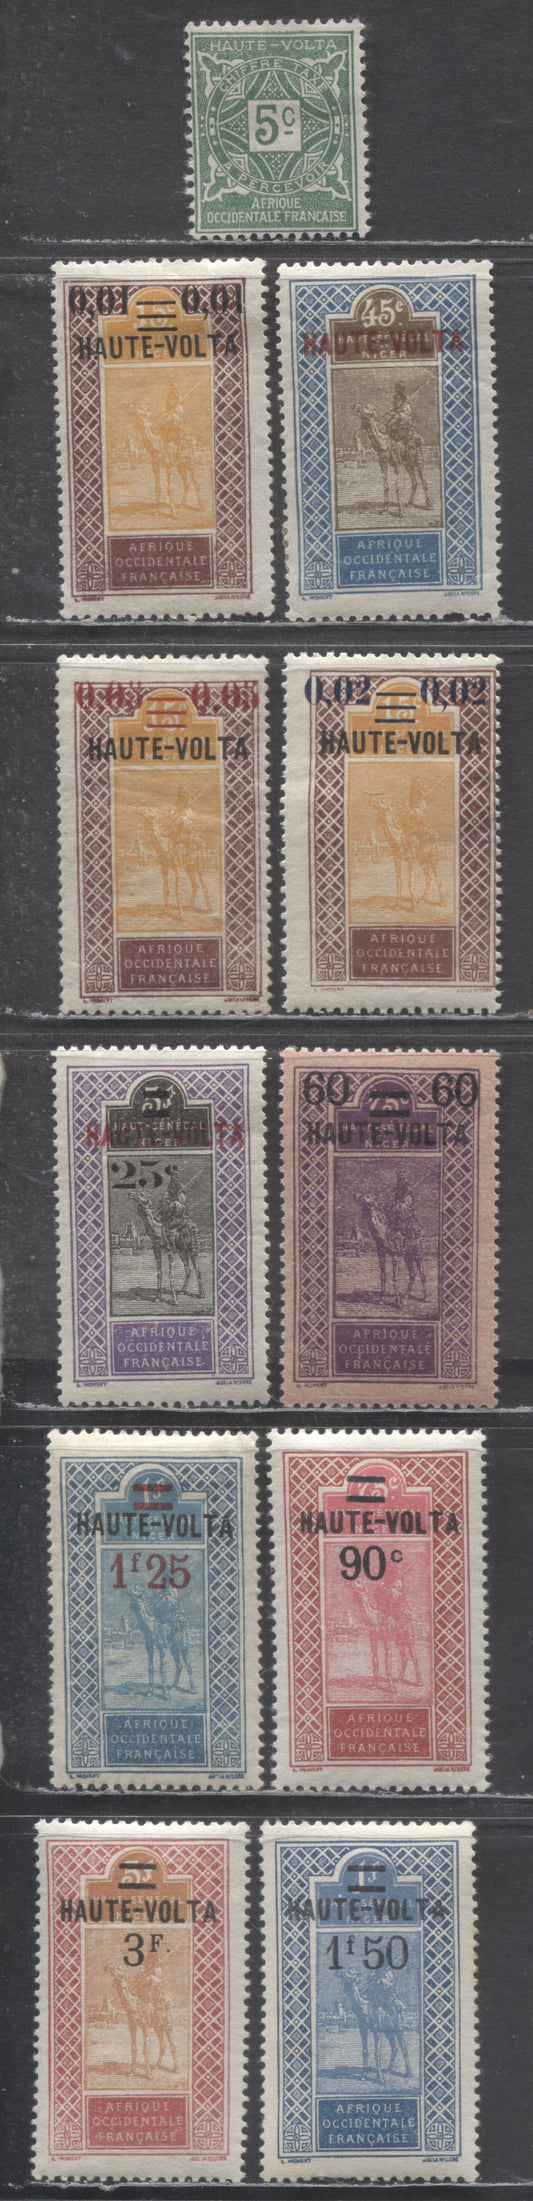 Lot 96 Burkina Faso (Upper Volta) SC#1F/J11 1920-1928 Mail Carrier Definitives With Haute Volta Overprints & Postage Dues, 11 F/VFOG Singles, Click on Listing to See ALL Pictures, Estimated Value $10